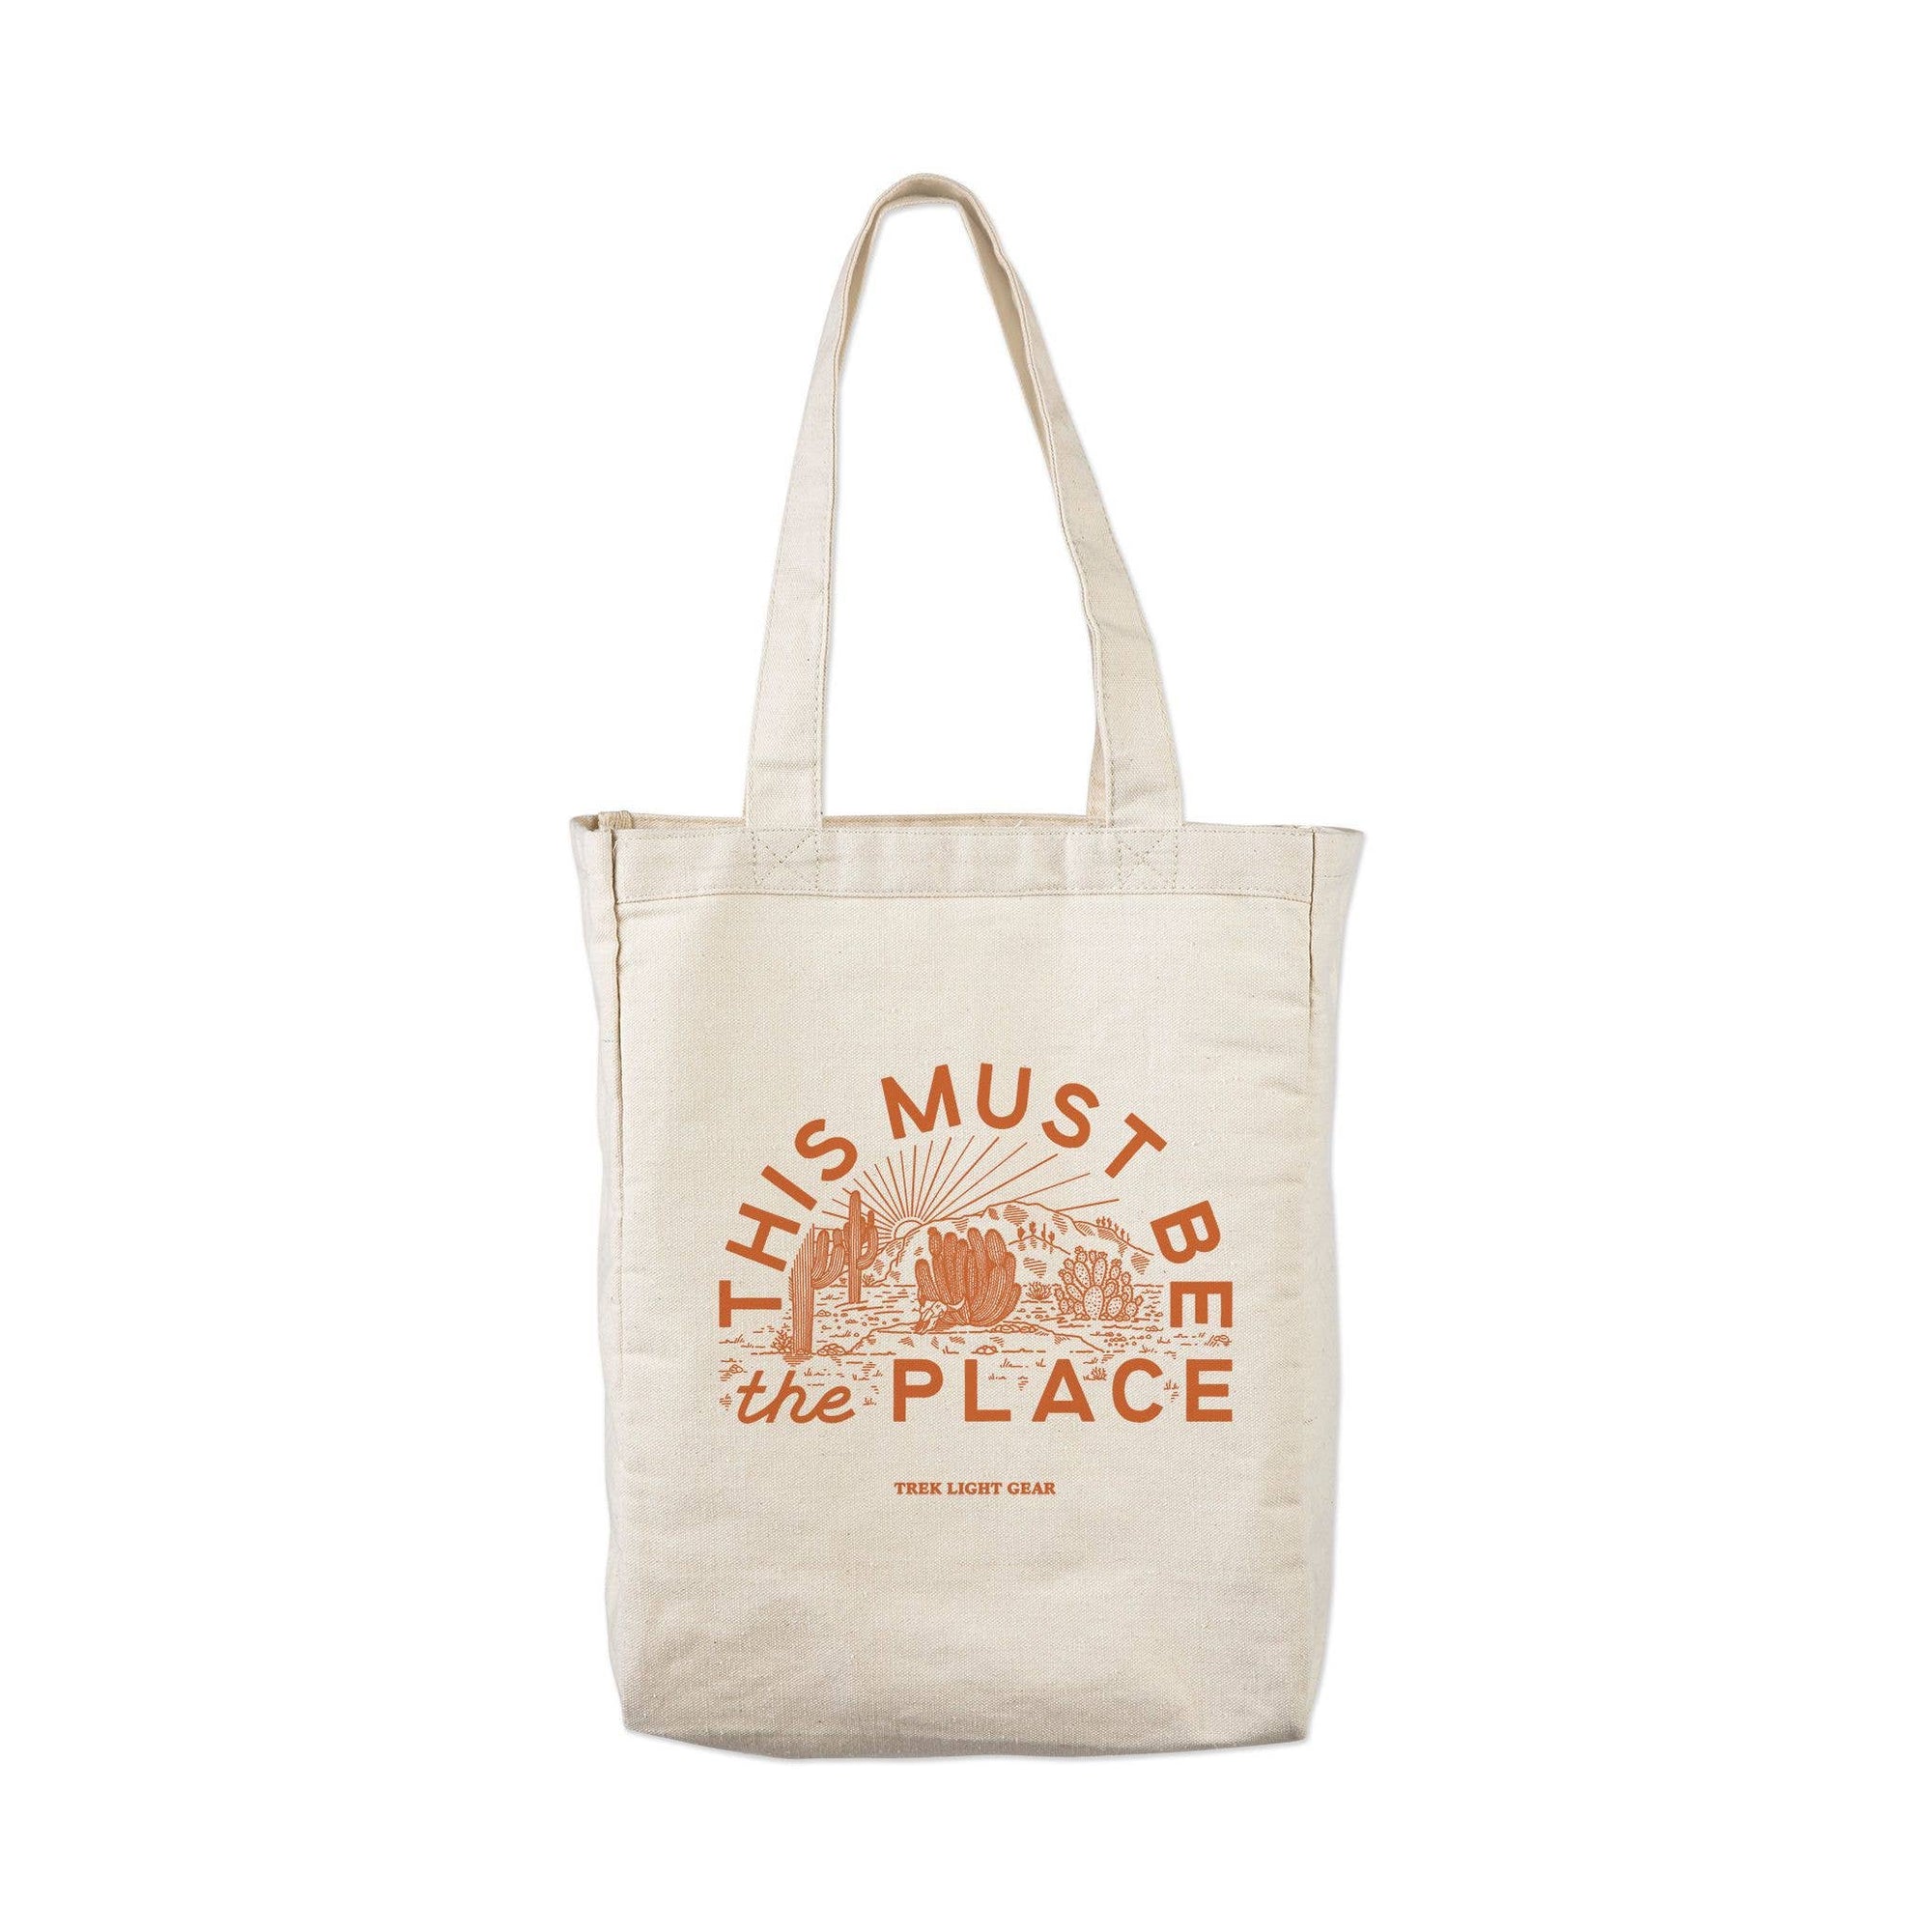 This Must Be The Place Tote Bag